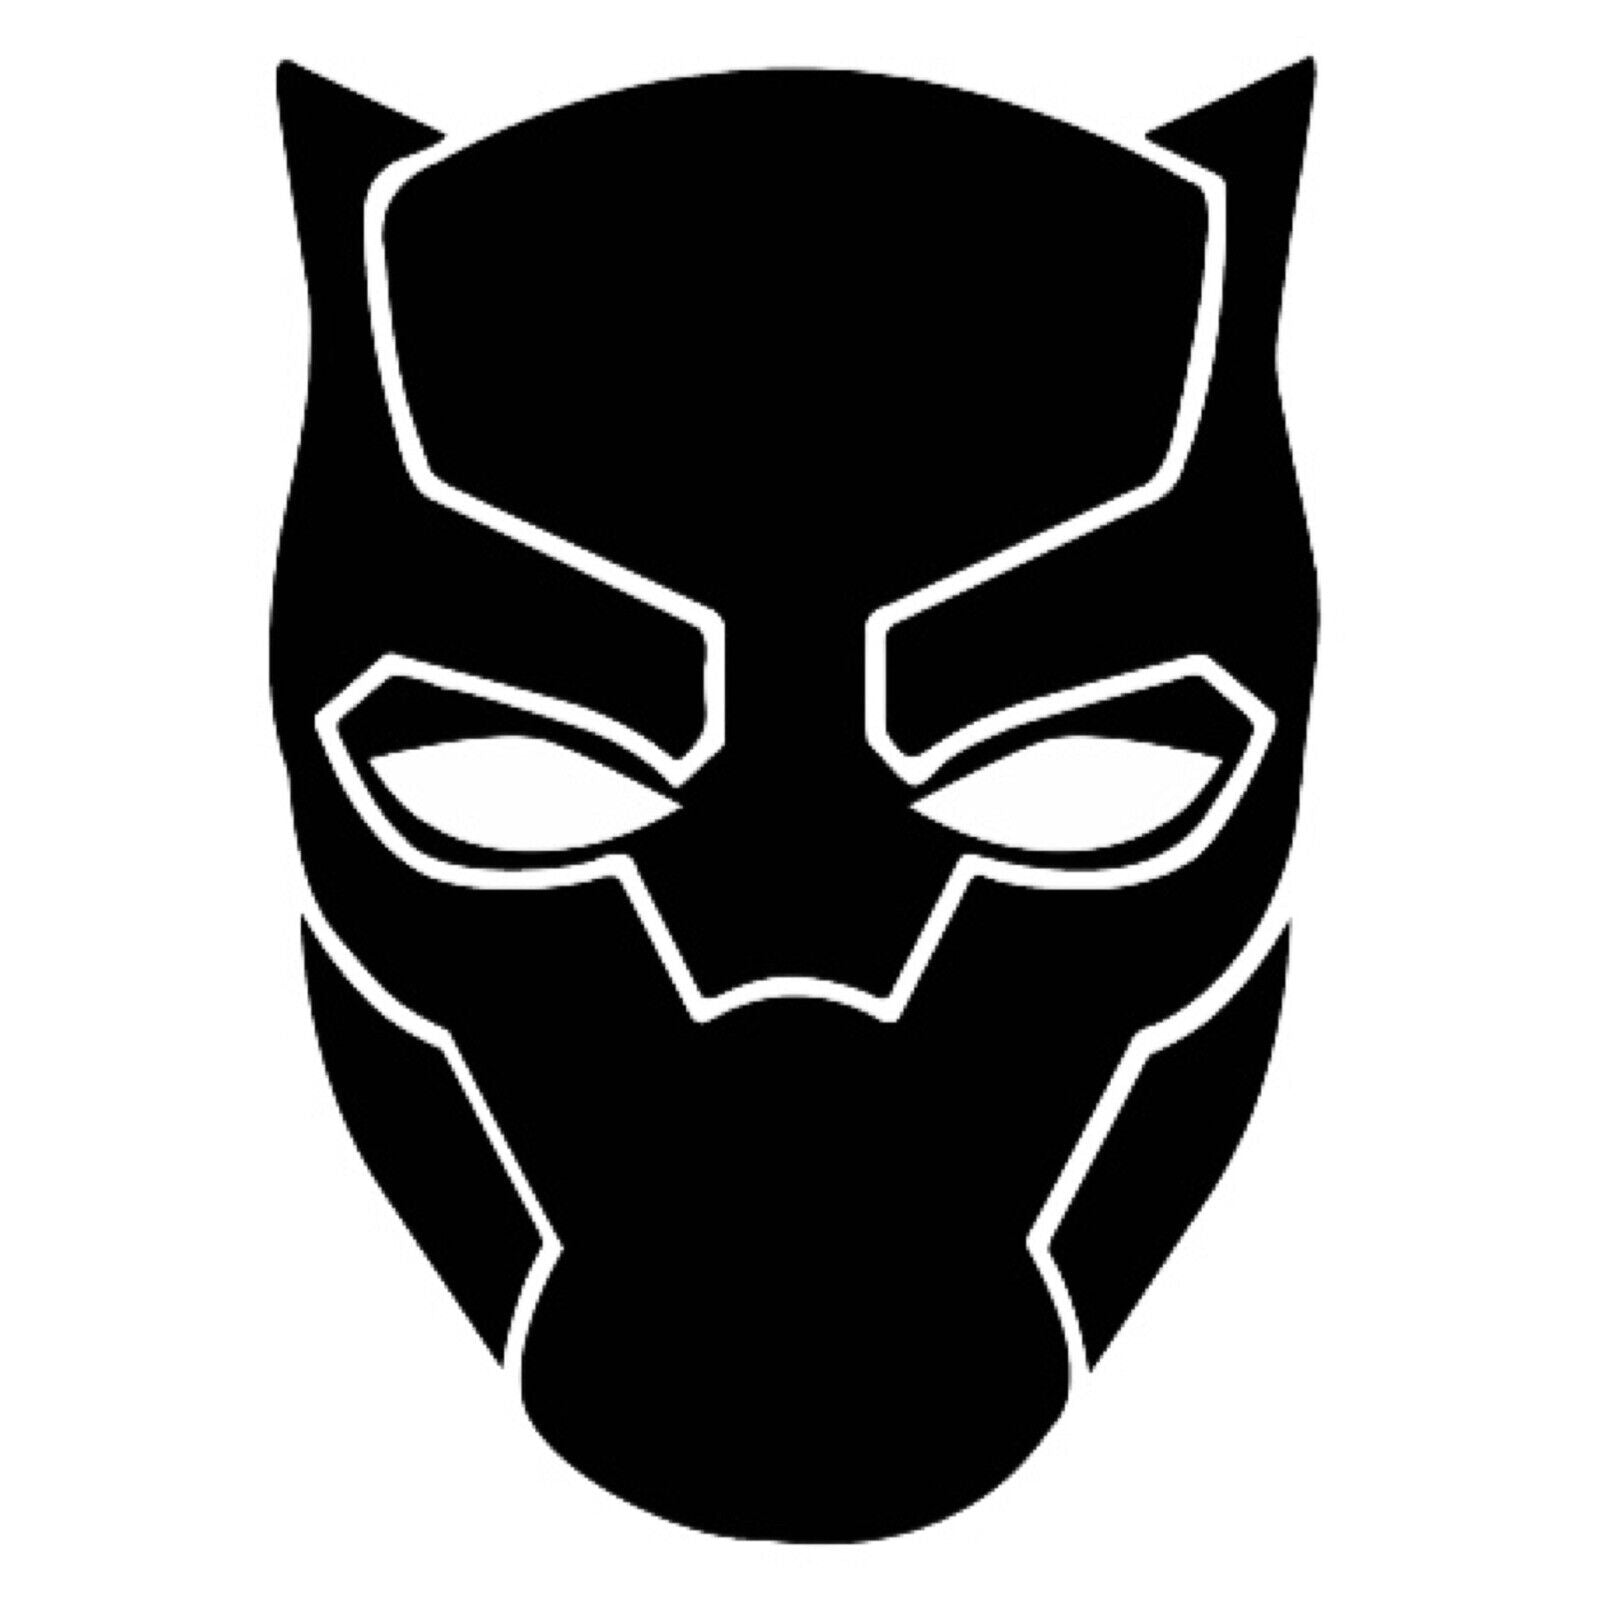 Black Panther PRE CUT 4” Edible Icing Logo Birthday Cake Topper Decorations